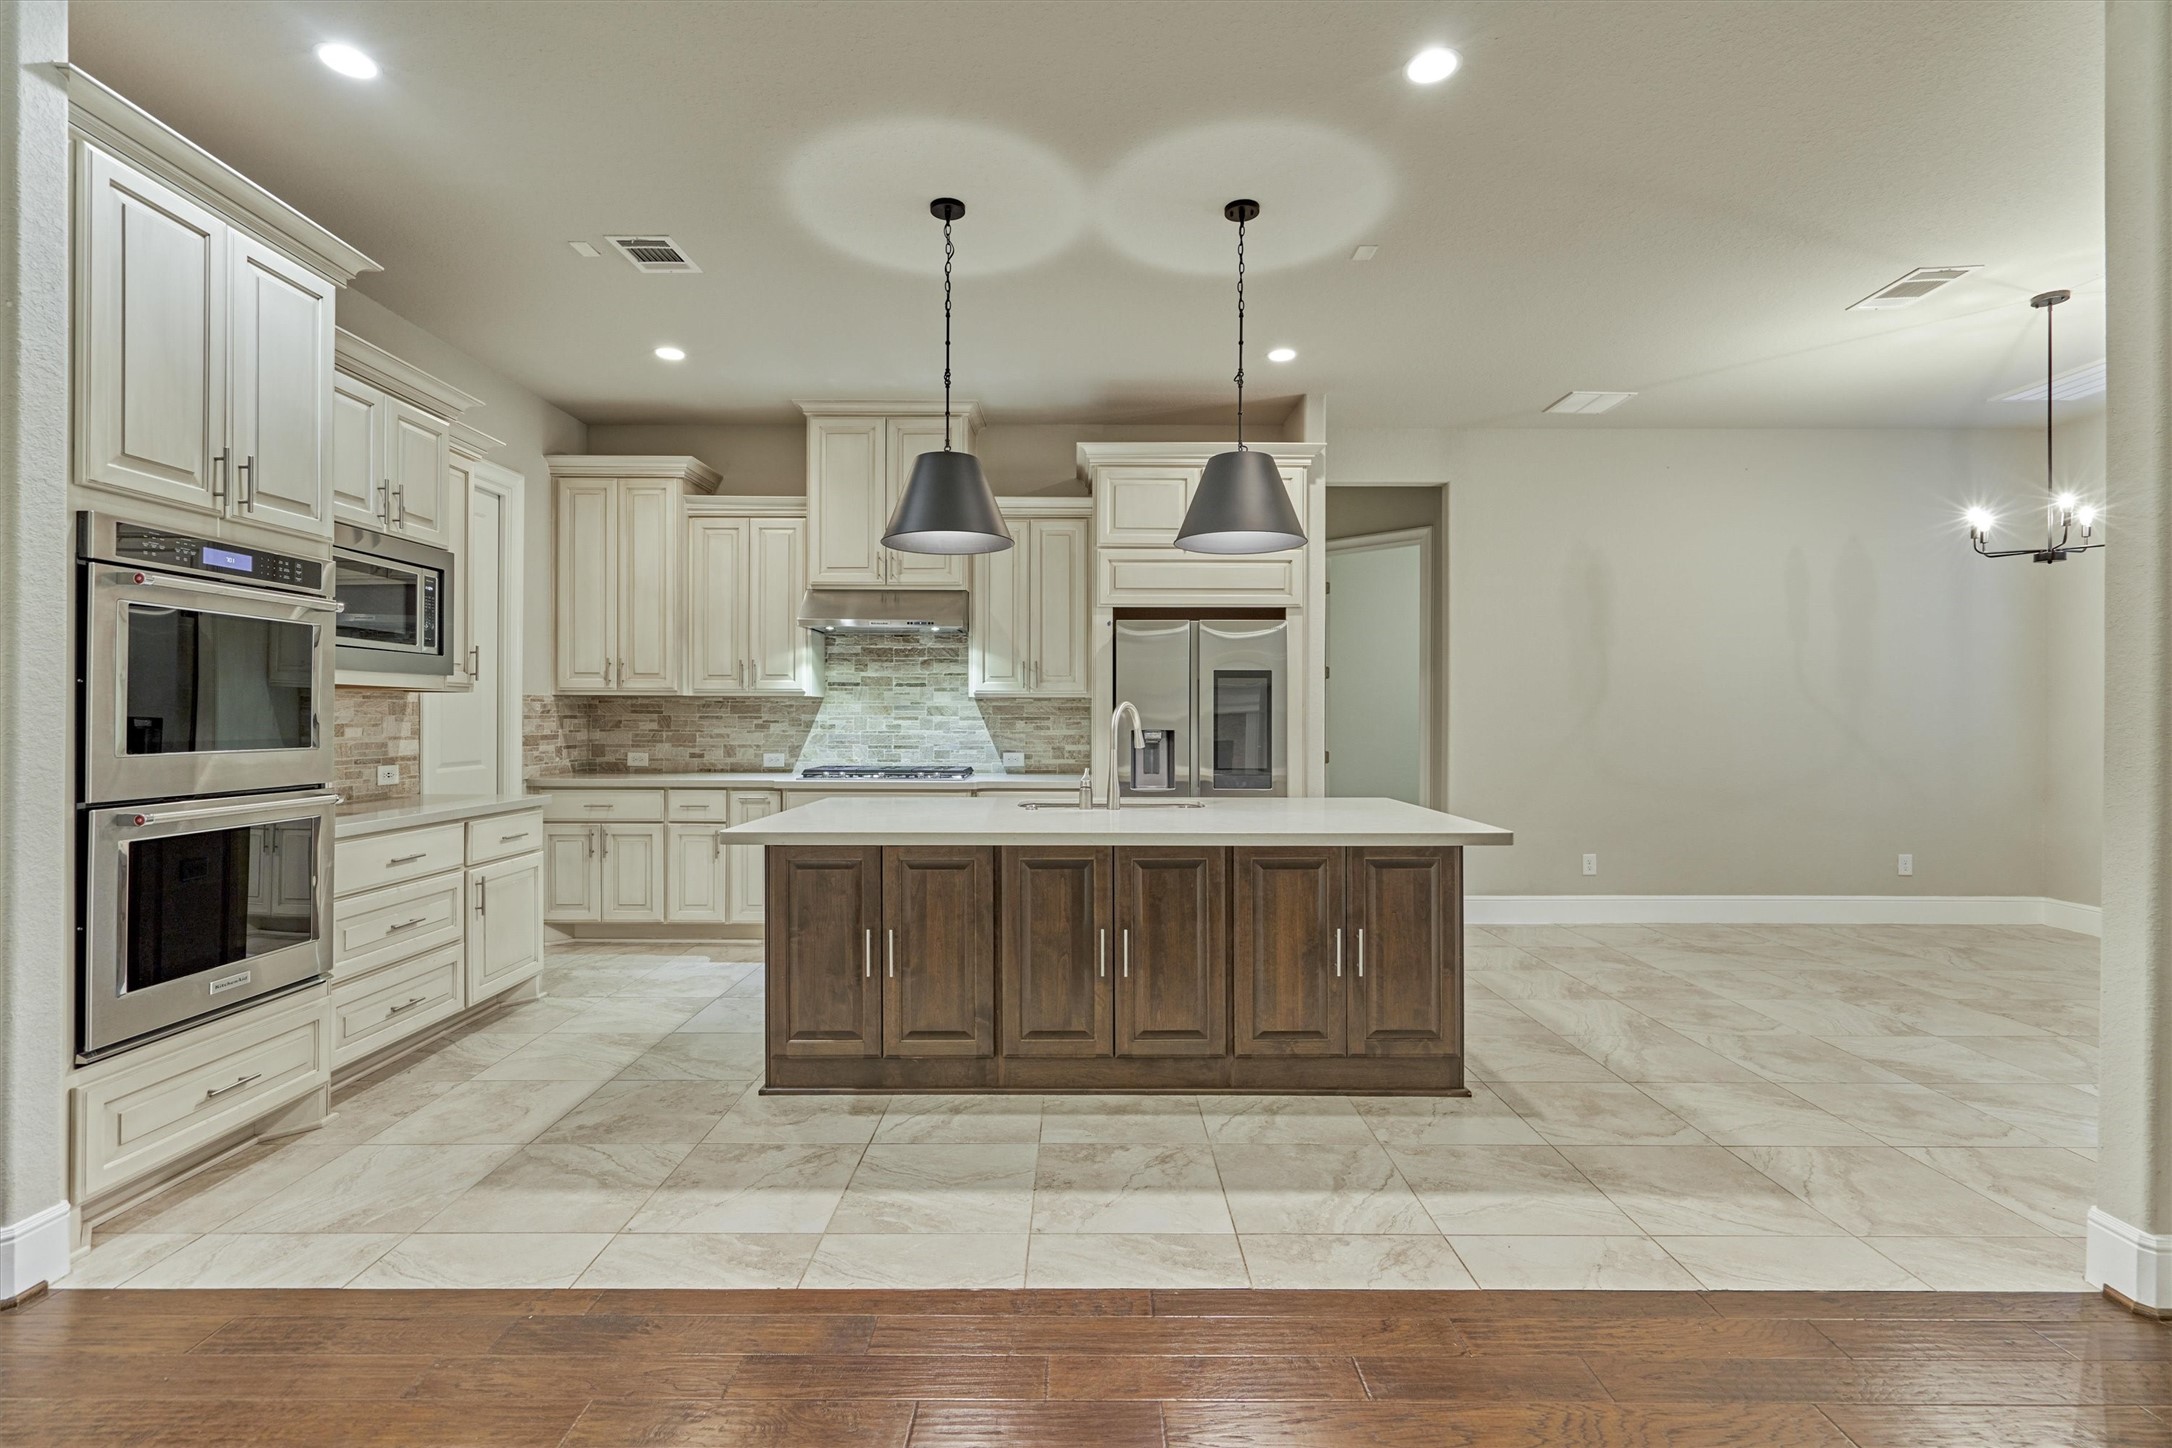 This gourmet kitchen features a beautiful quartz island with plenty of room to prep many delicious meals!
